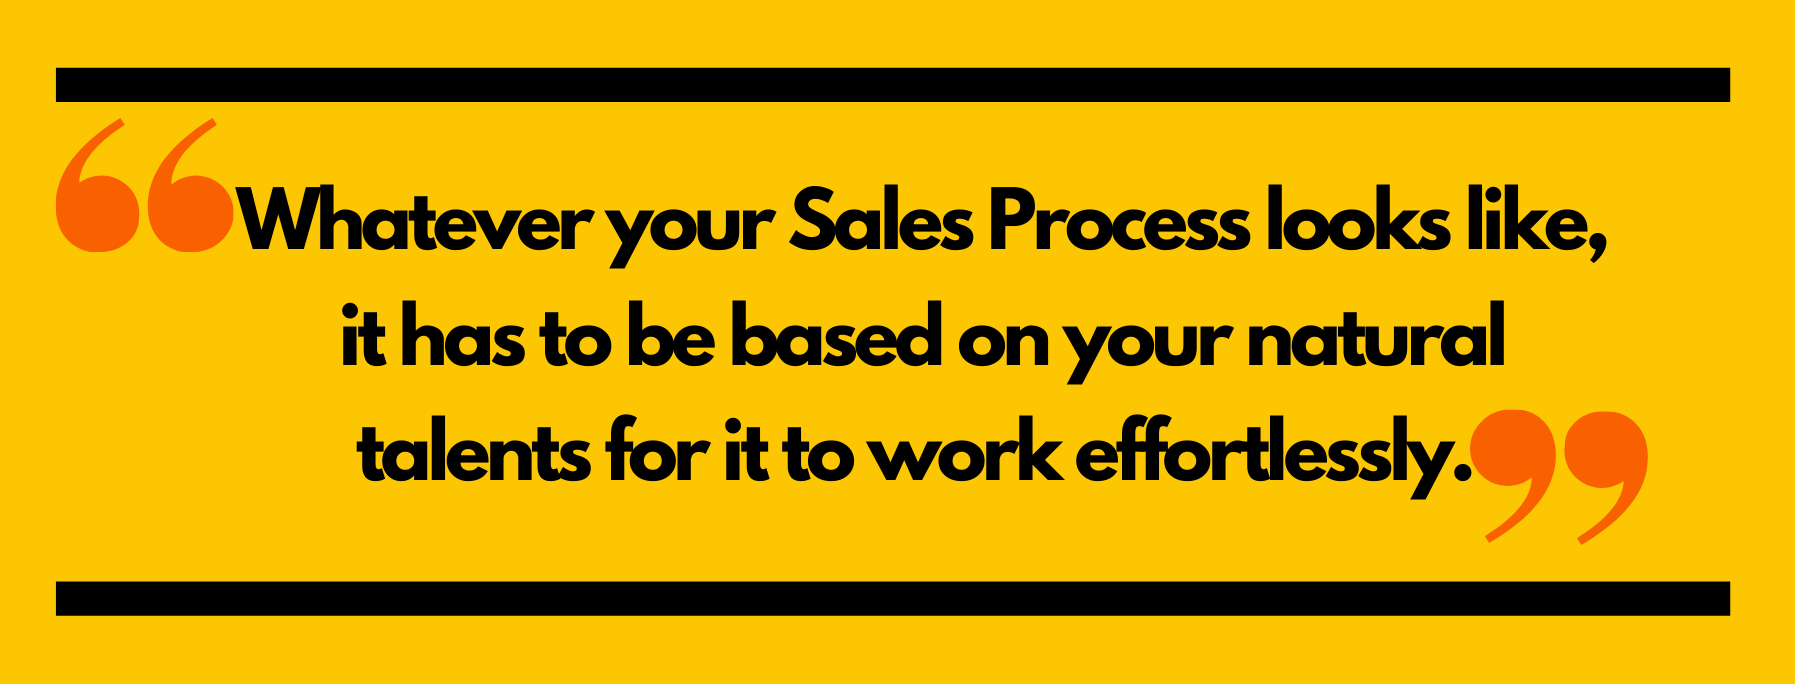 the best sales process is also based on your talents